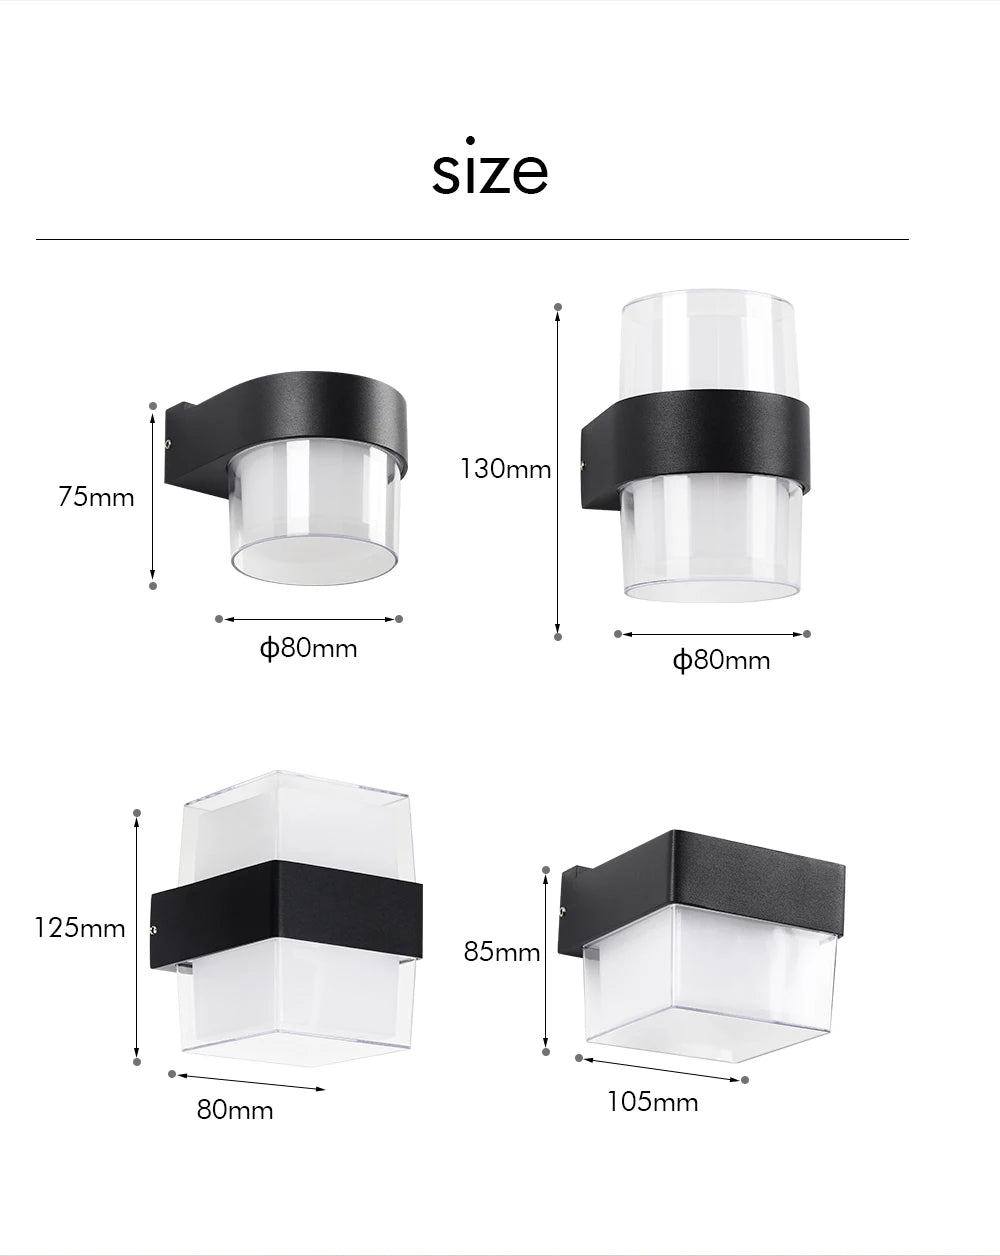 IP65 Waterproof Interior Wall Light, Modern LED wall light with IP65 waterproof rating, 2-year warranty, and free shipping.